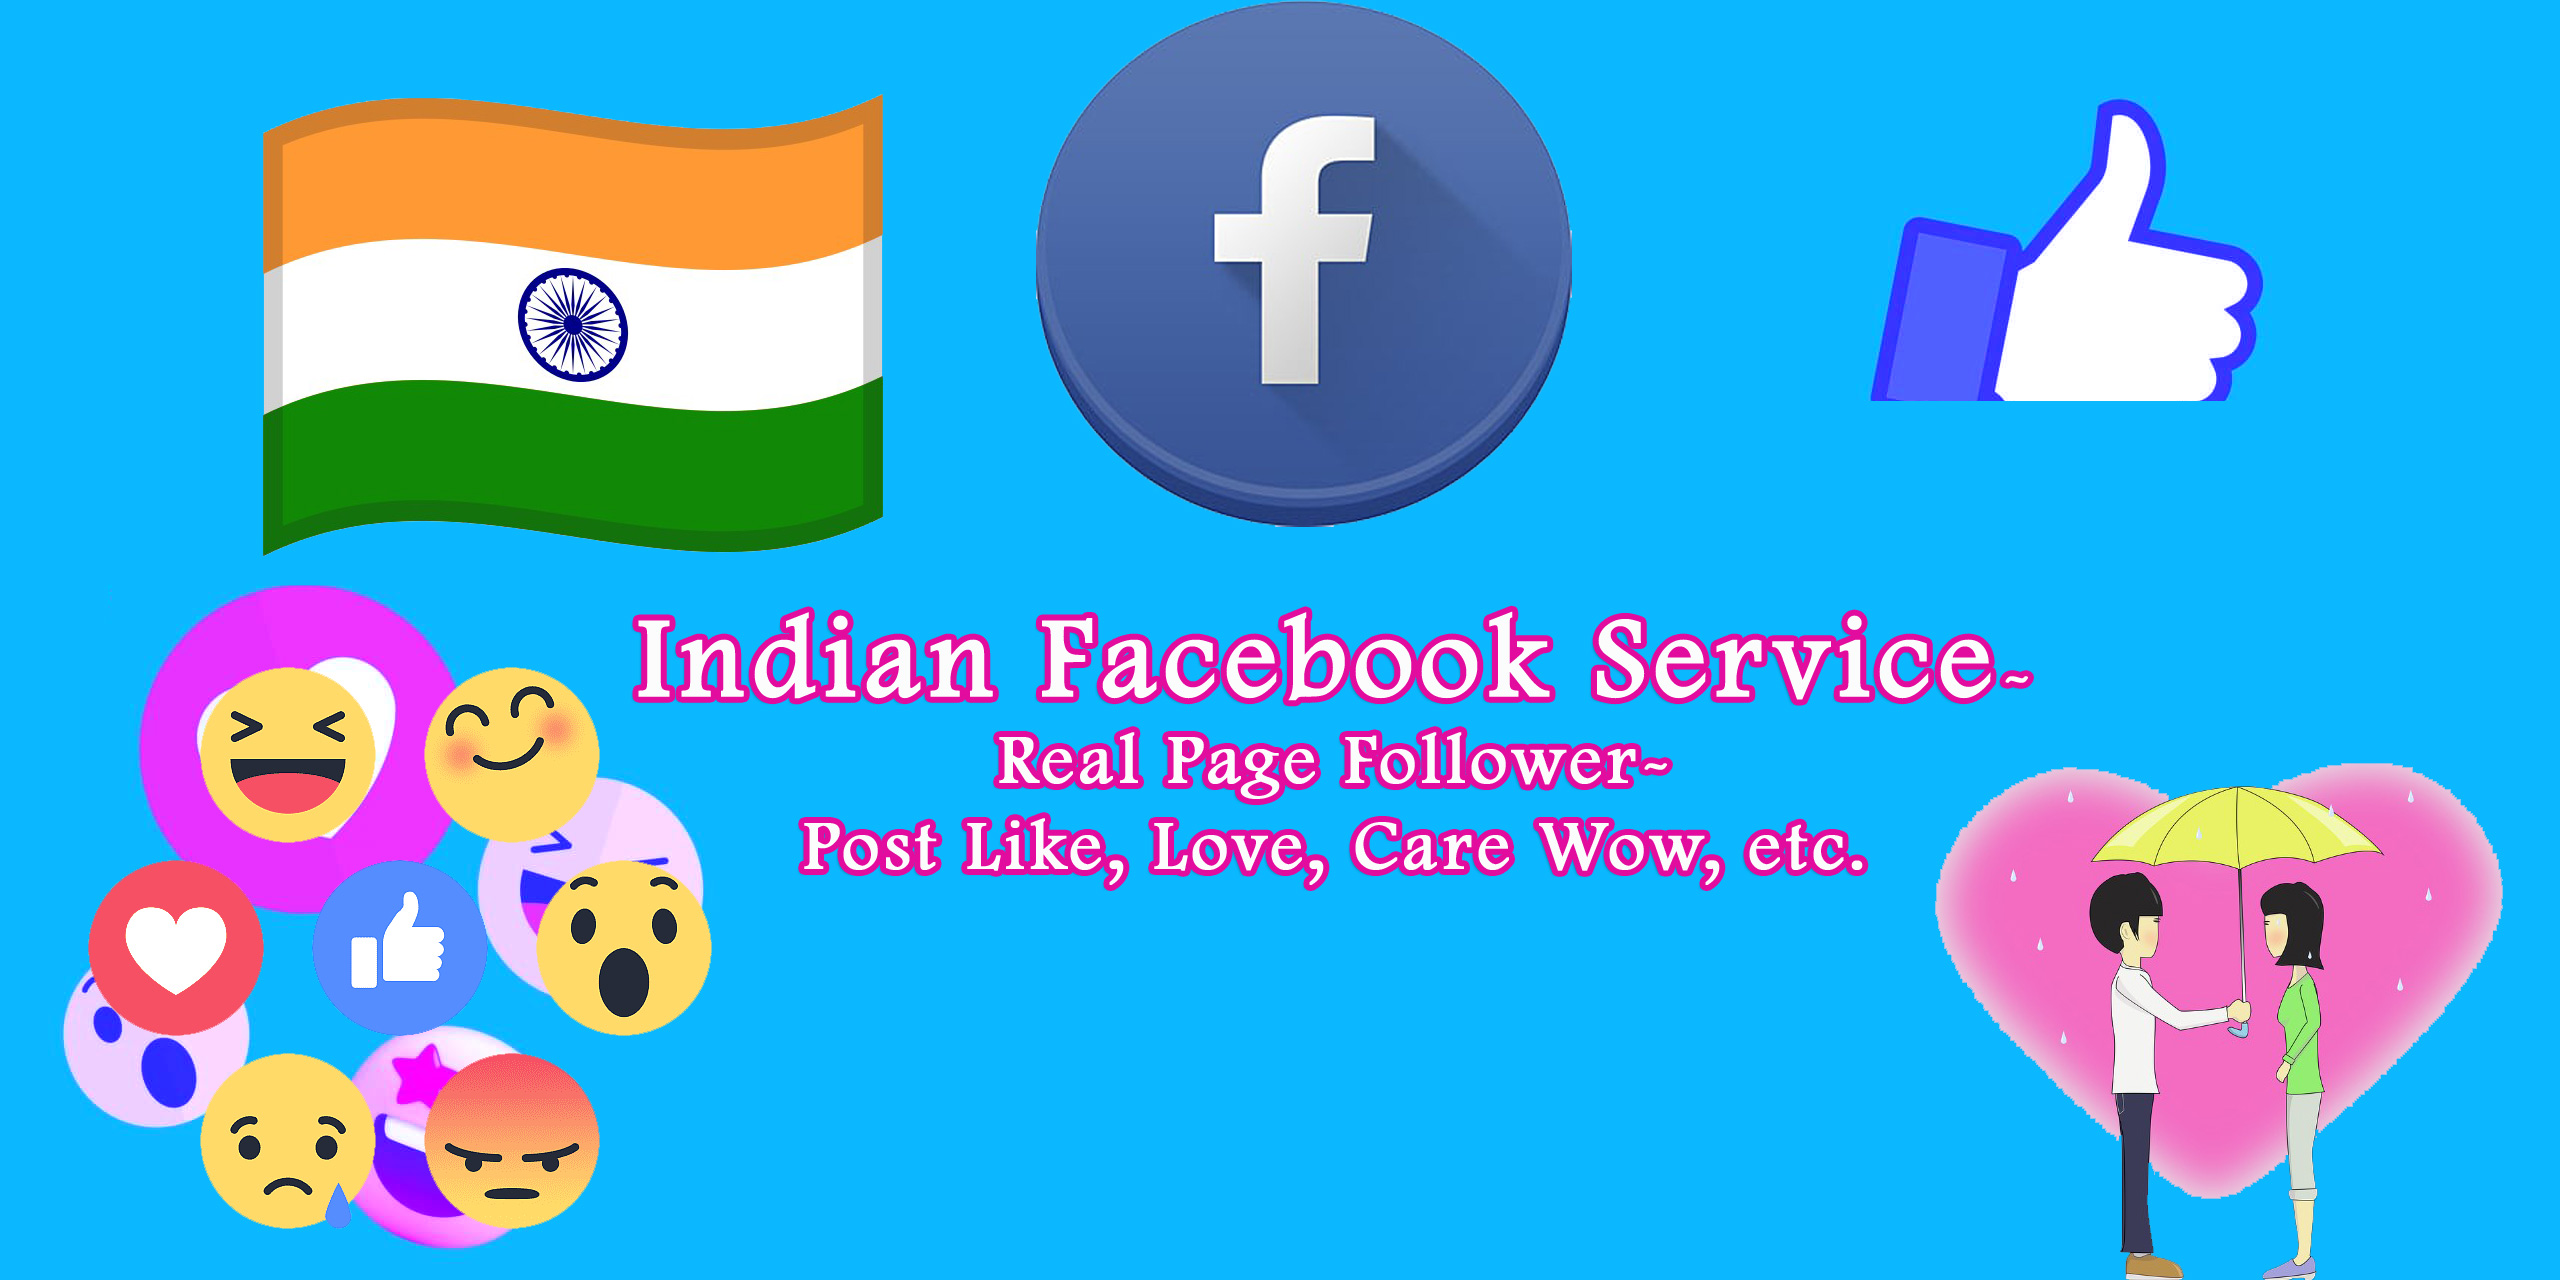 128923Facebook Page Sell 20k+ Followers old page